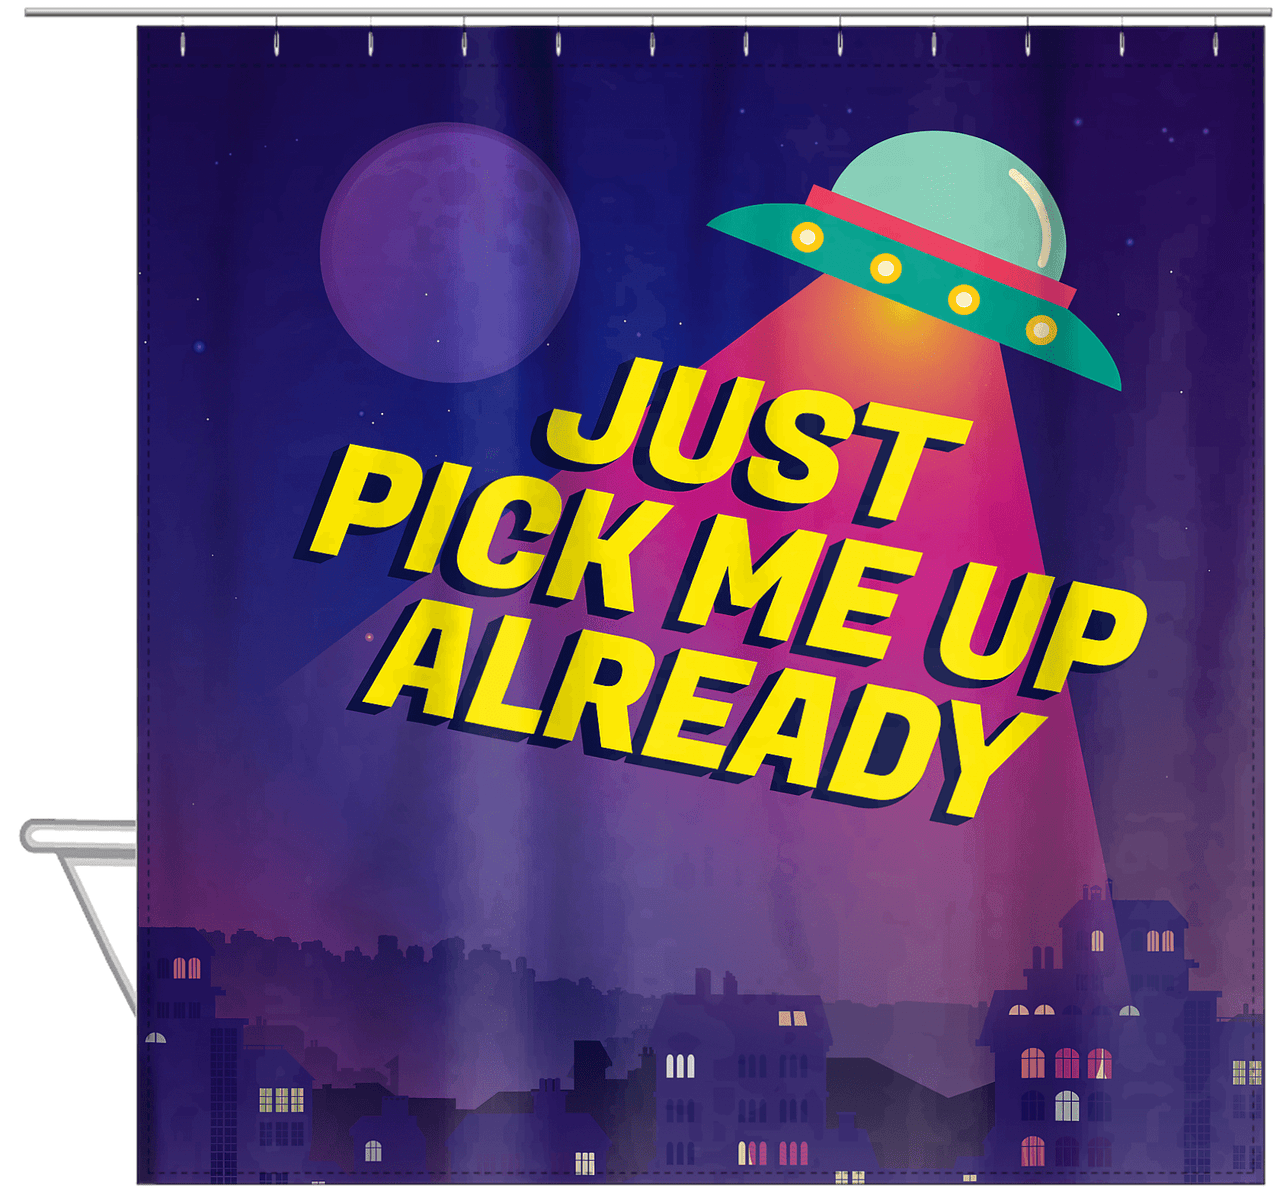 Aliens / UFO Shower Curtain - Just Pick Me Up Already - Hanging View